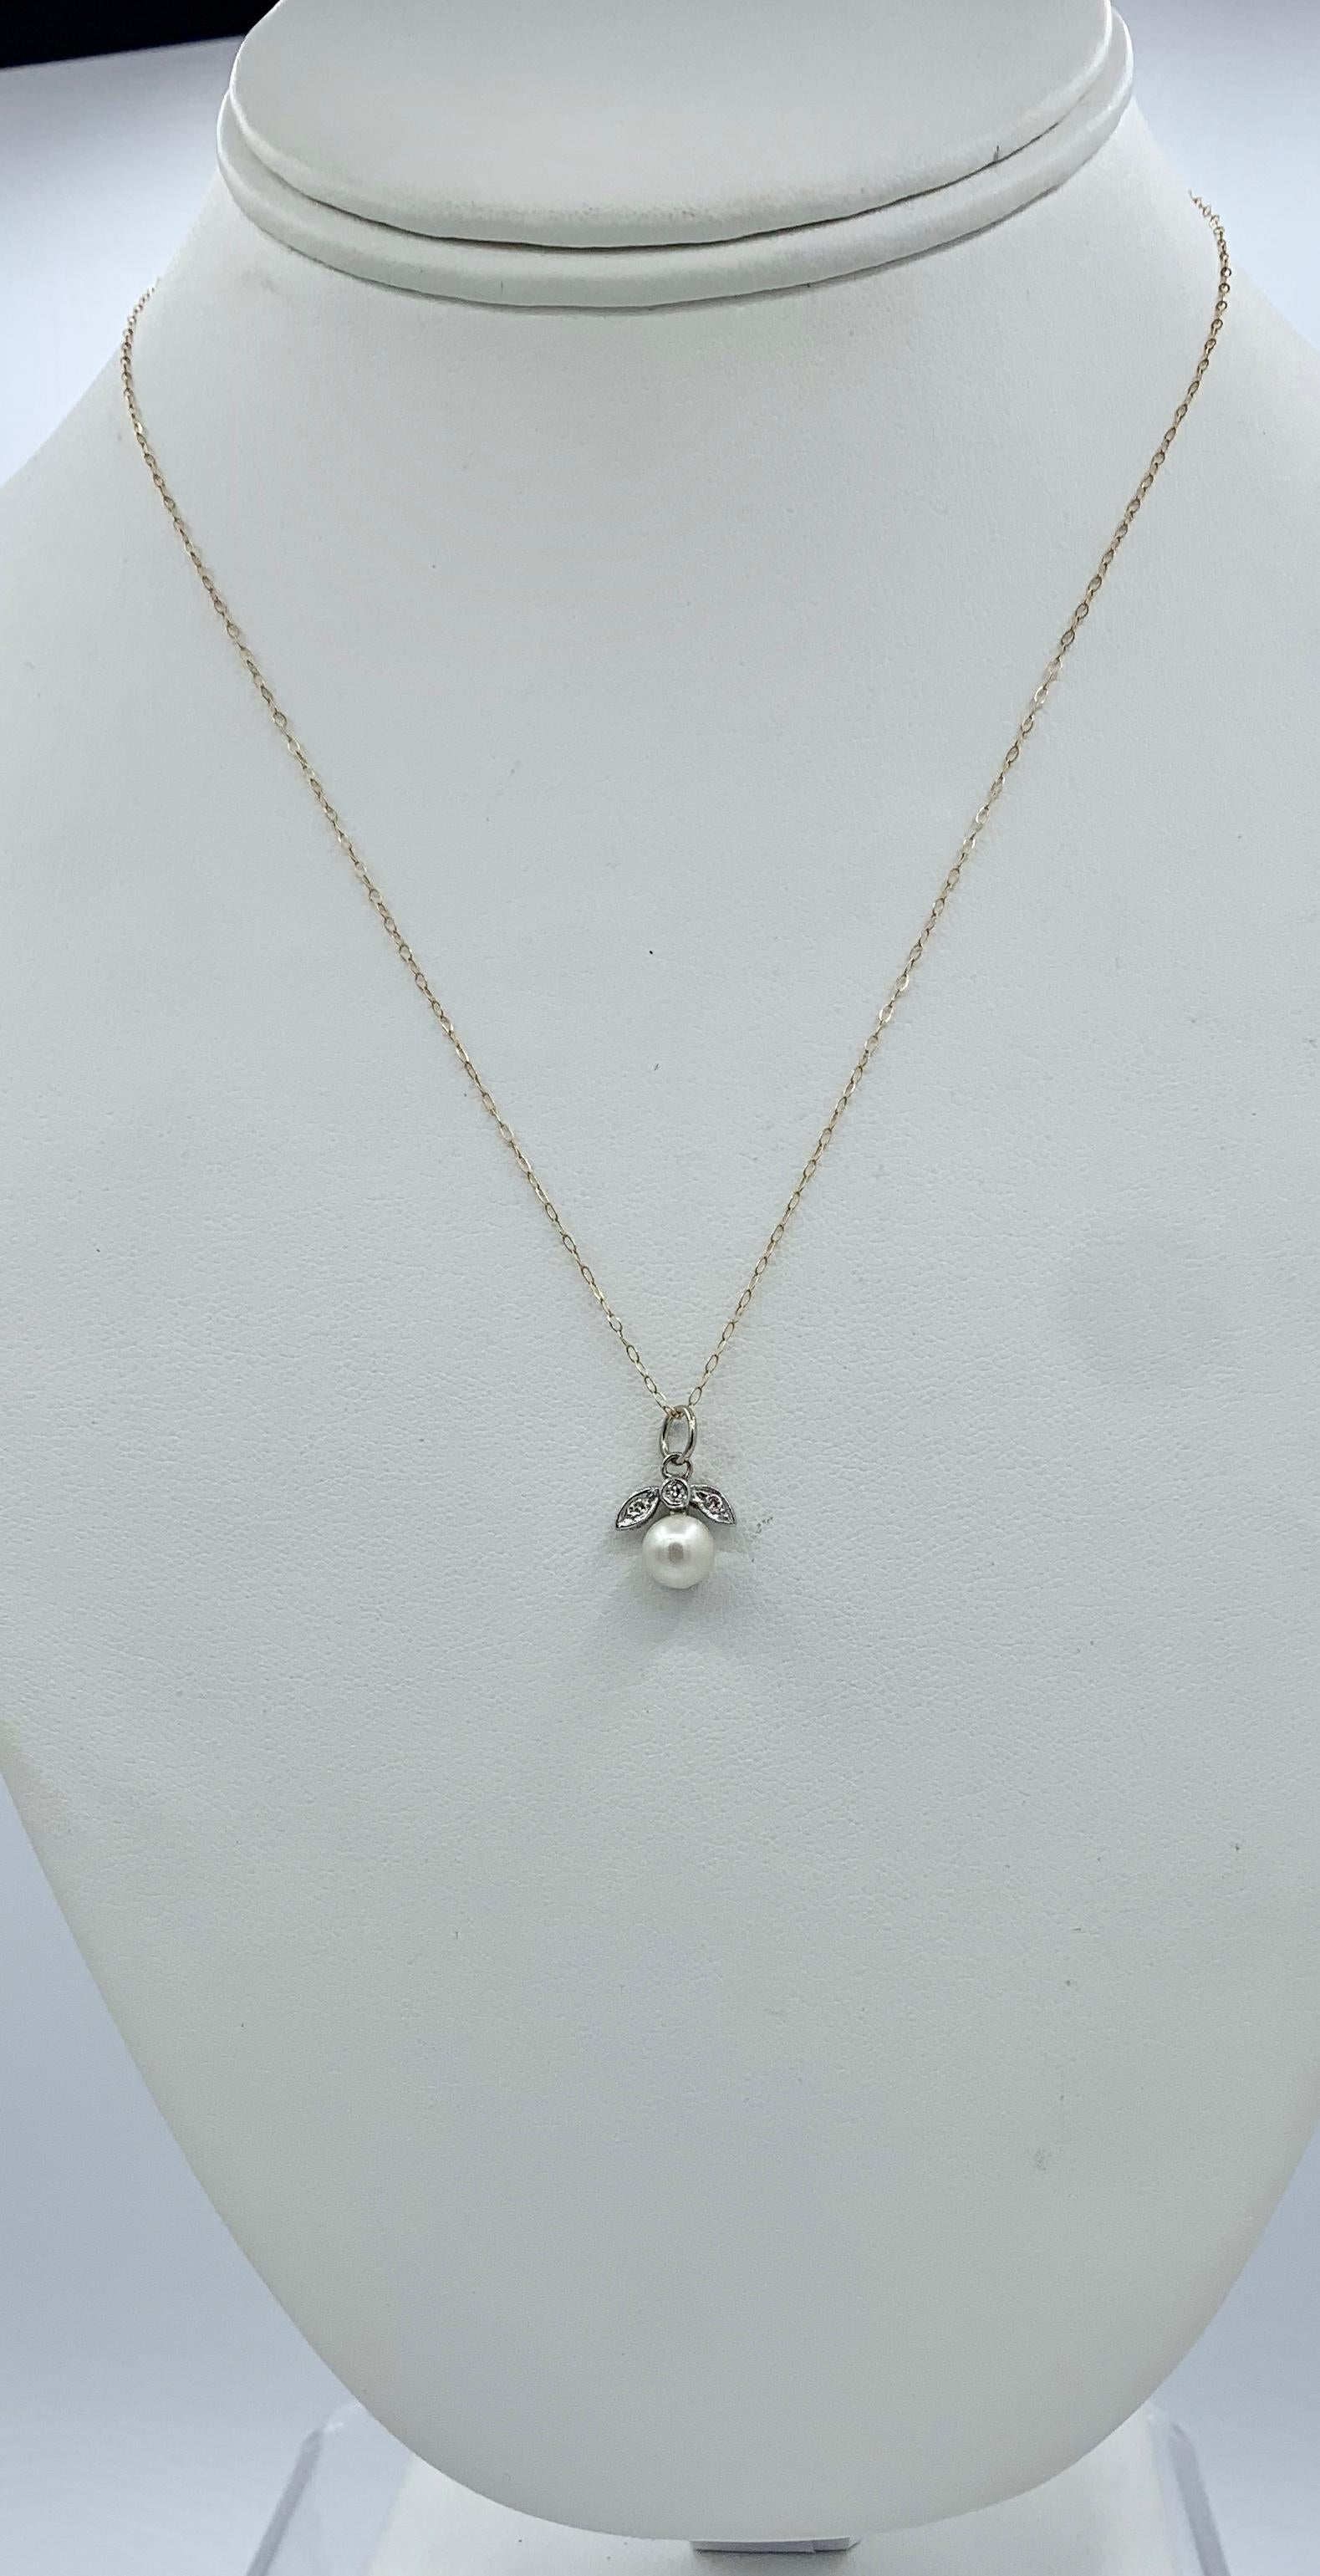 A wonderful original Art Deco - Victorian - Belle Epoque pendant or charm in a fruit, flower motif with a stunning White Pearl hanging from a leaf motif set with Old Mine Cut Diamonds in 10 Karat White Gold.  The pendant dates to circa 1860-1920. 